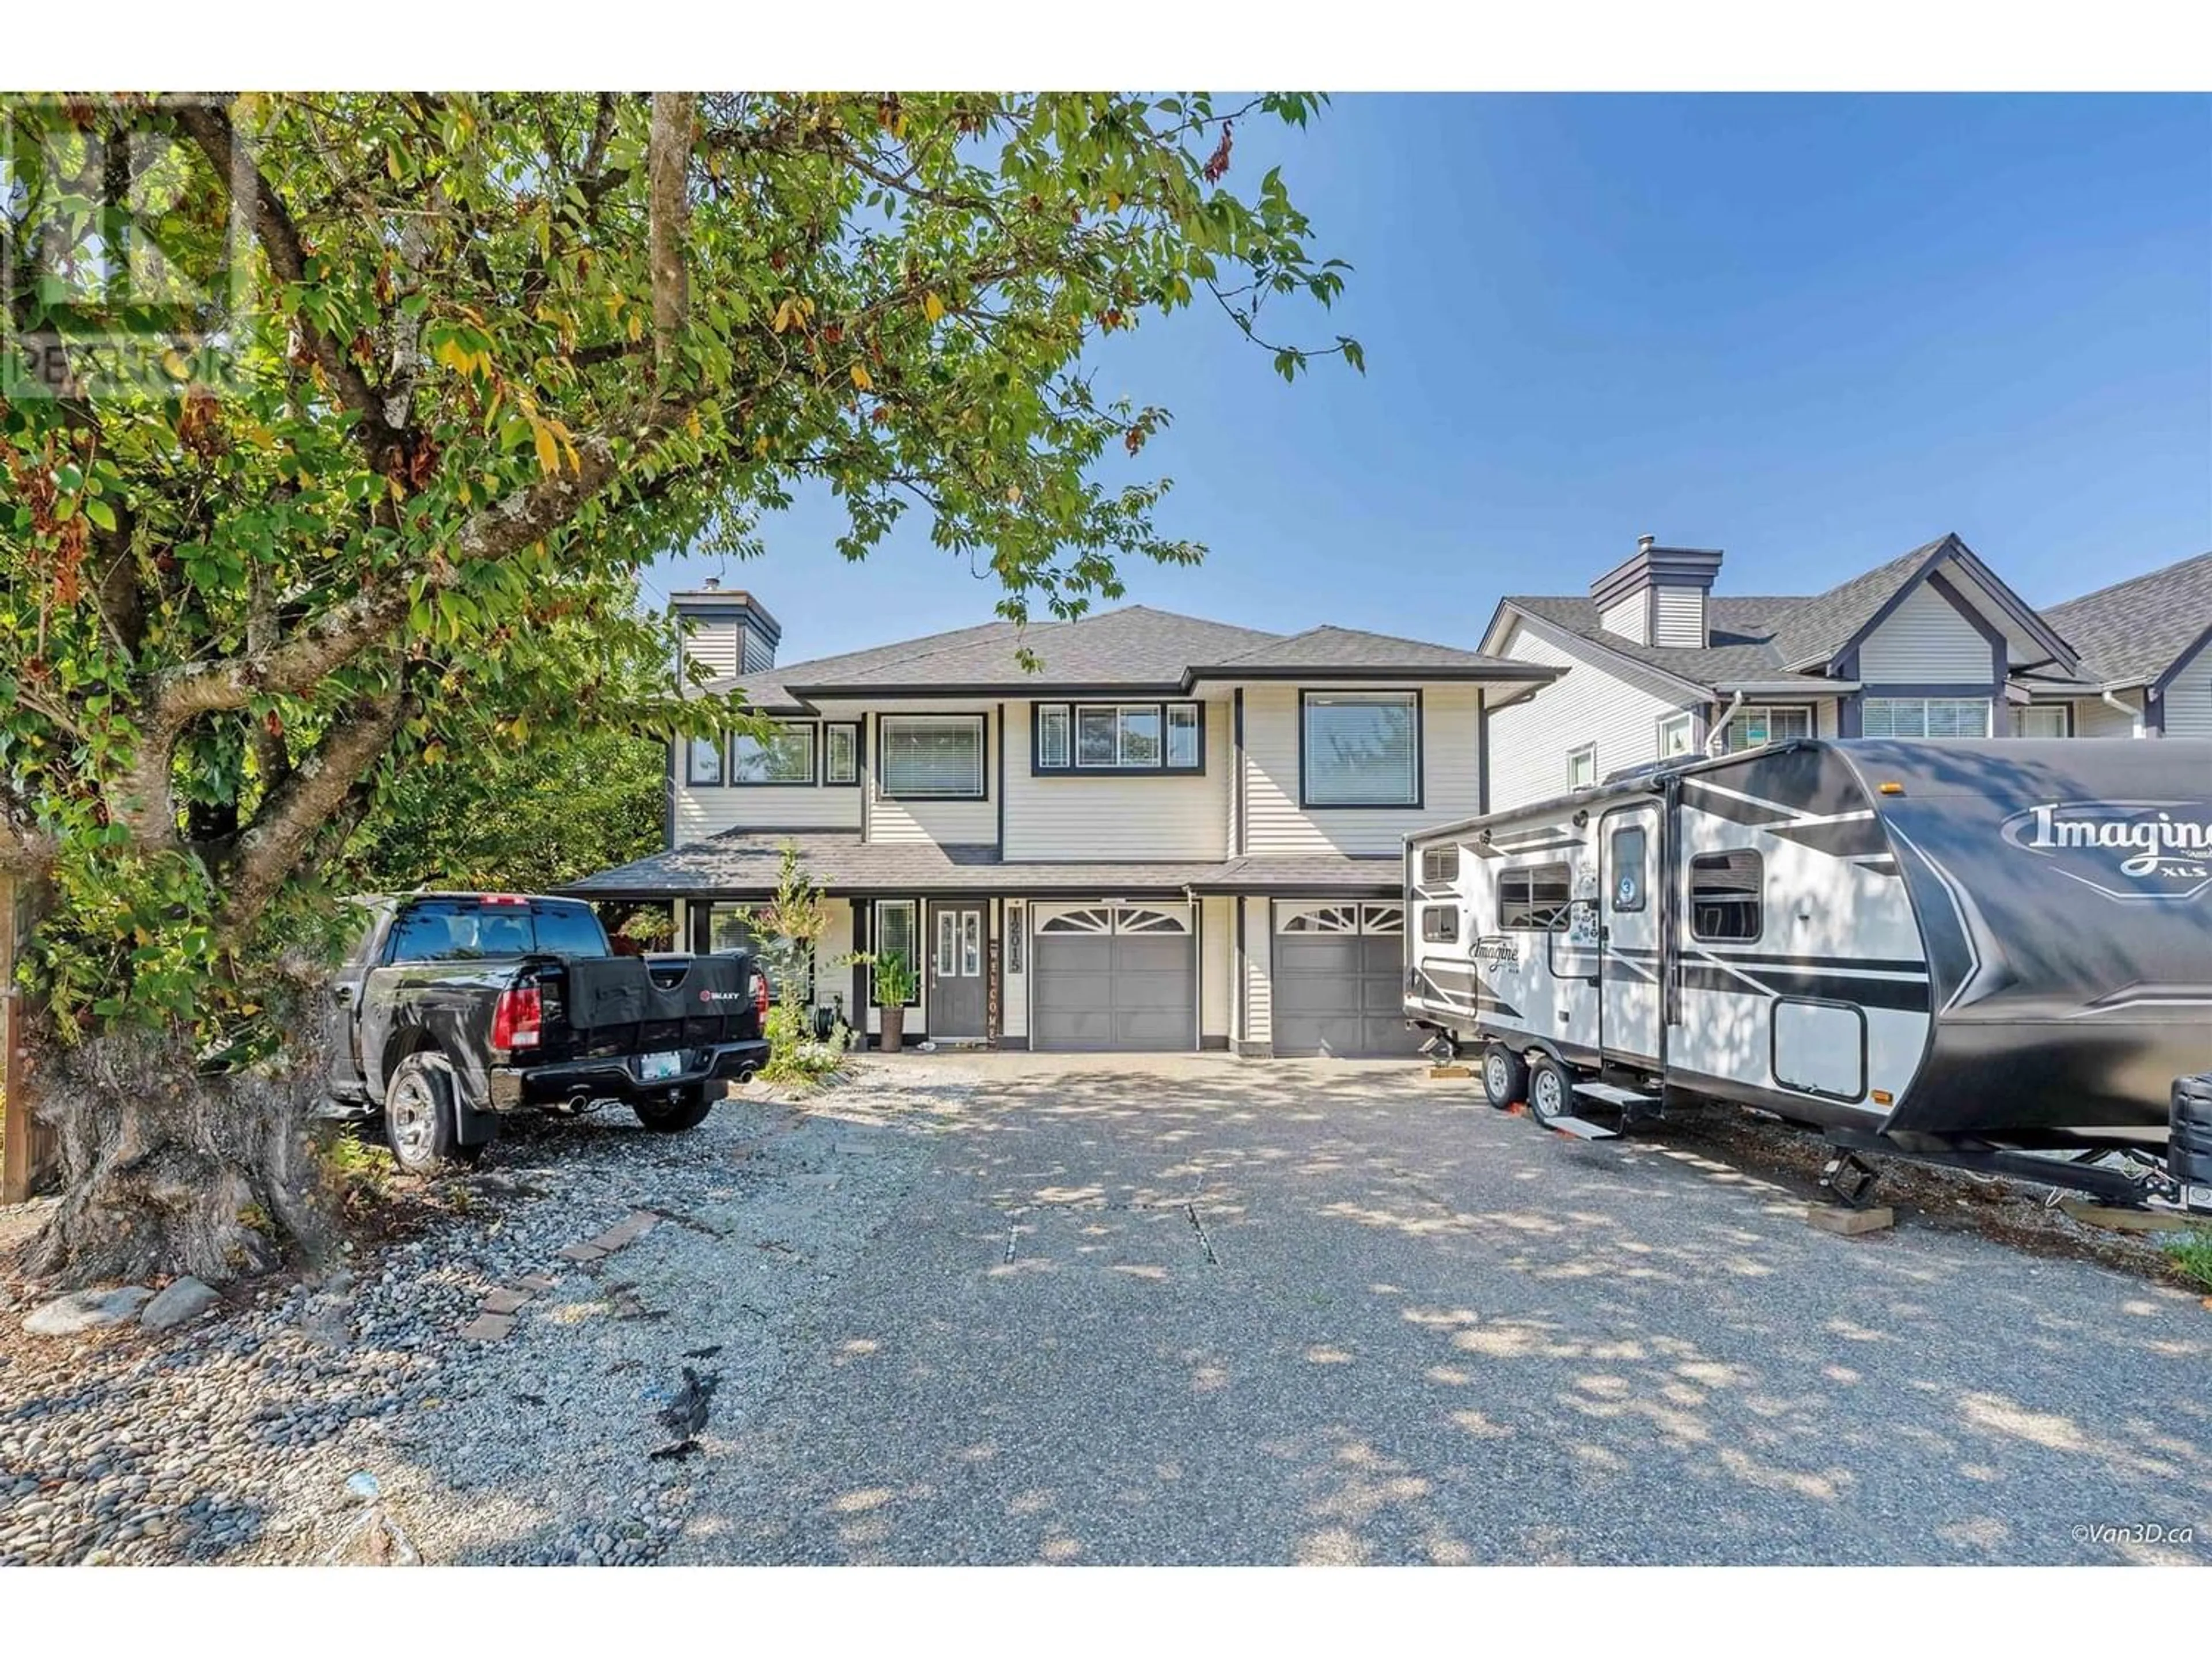 A pic from exterior of the house or condo for 12015 205 STREET, Maple Ridge British Columbia V2X1A9